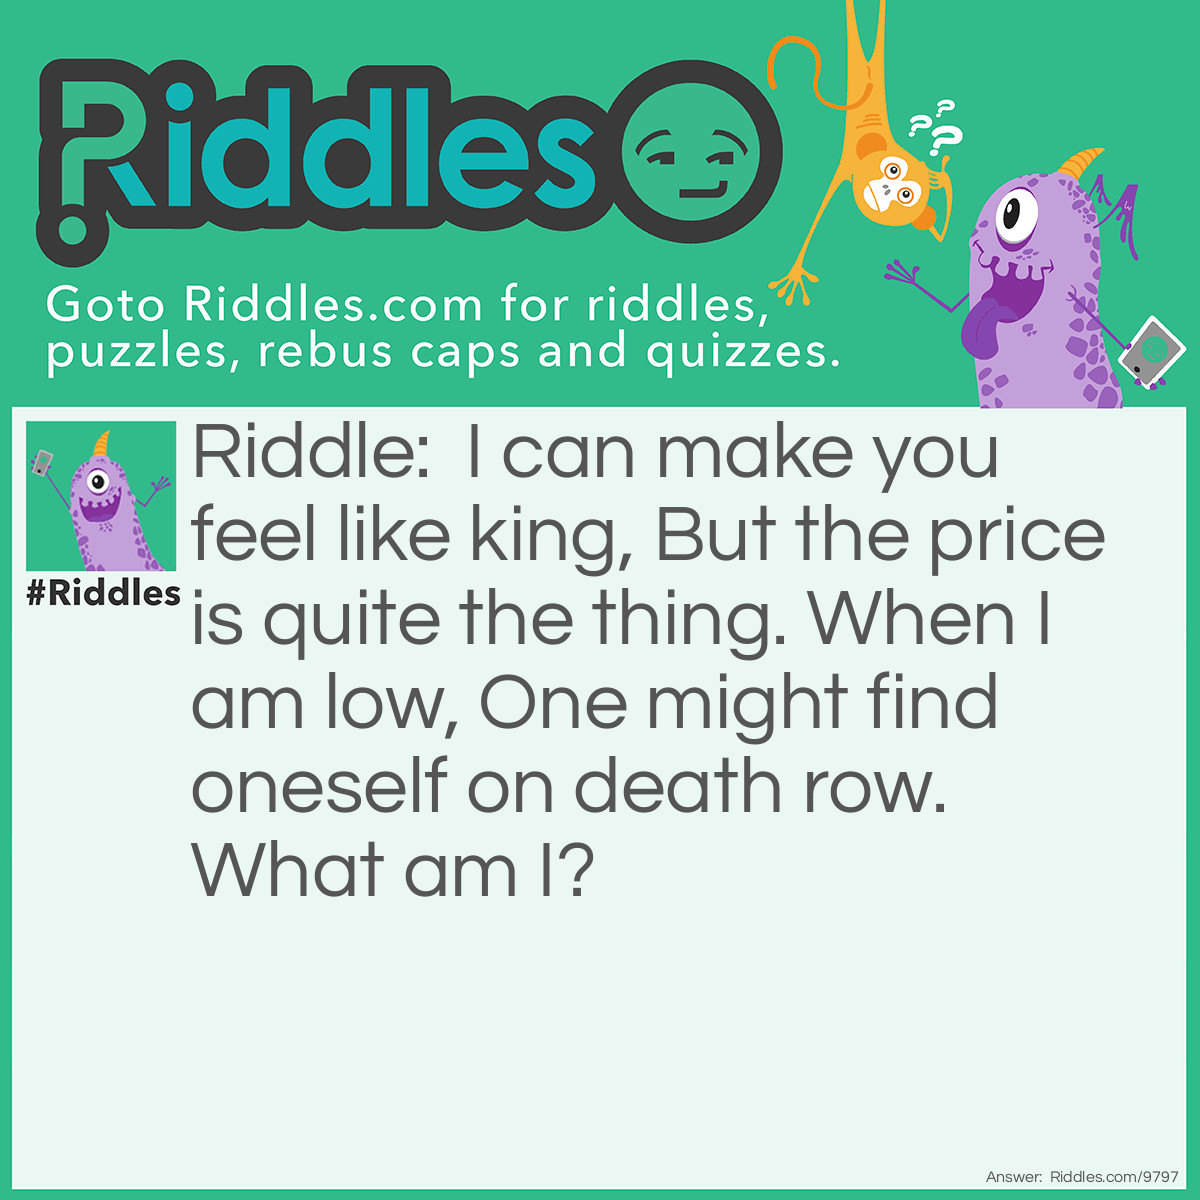 Riddle: I can make you feel like king, But the price is quite the thing. When I am low, One might find oneself on death row. What am I? Answer: Self-esteem.